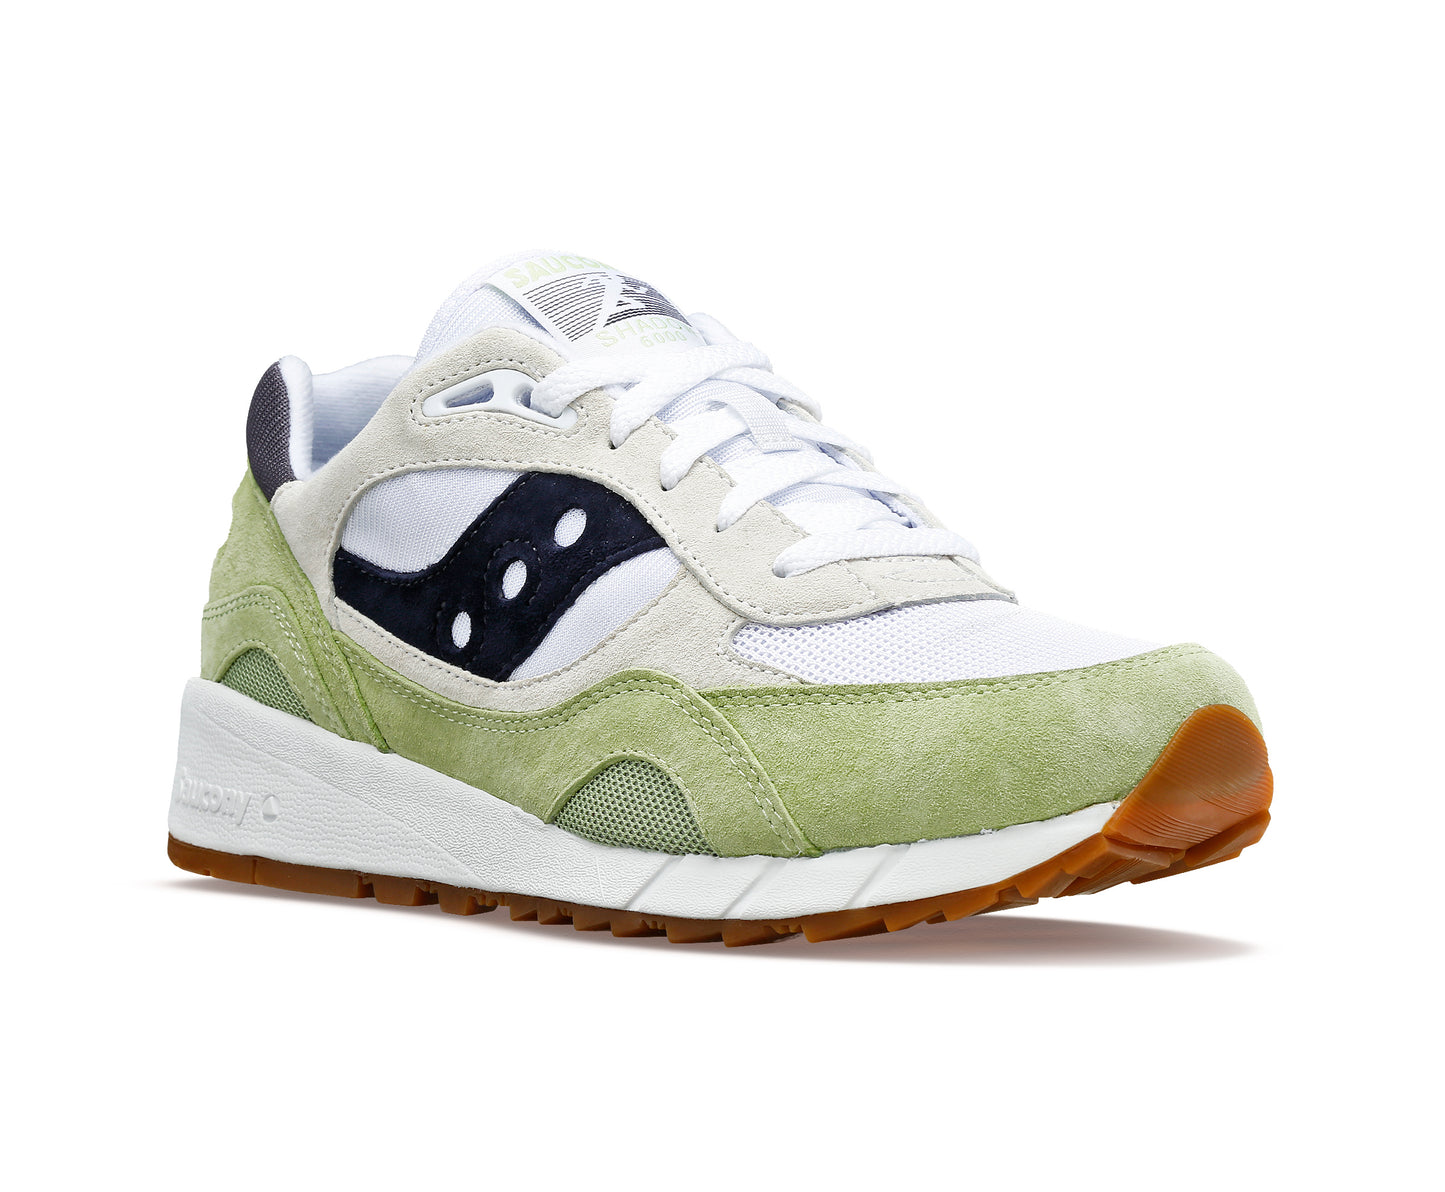 SAUCONY SHADOW 6000 - White Mint Navy